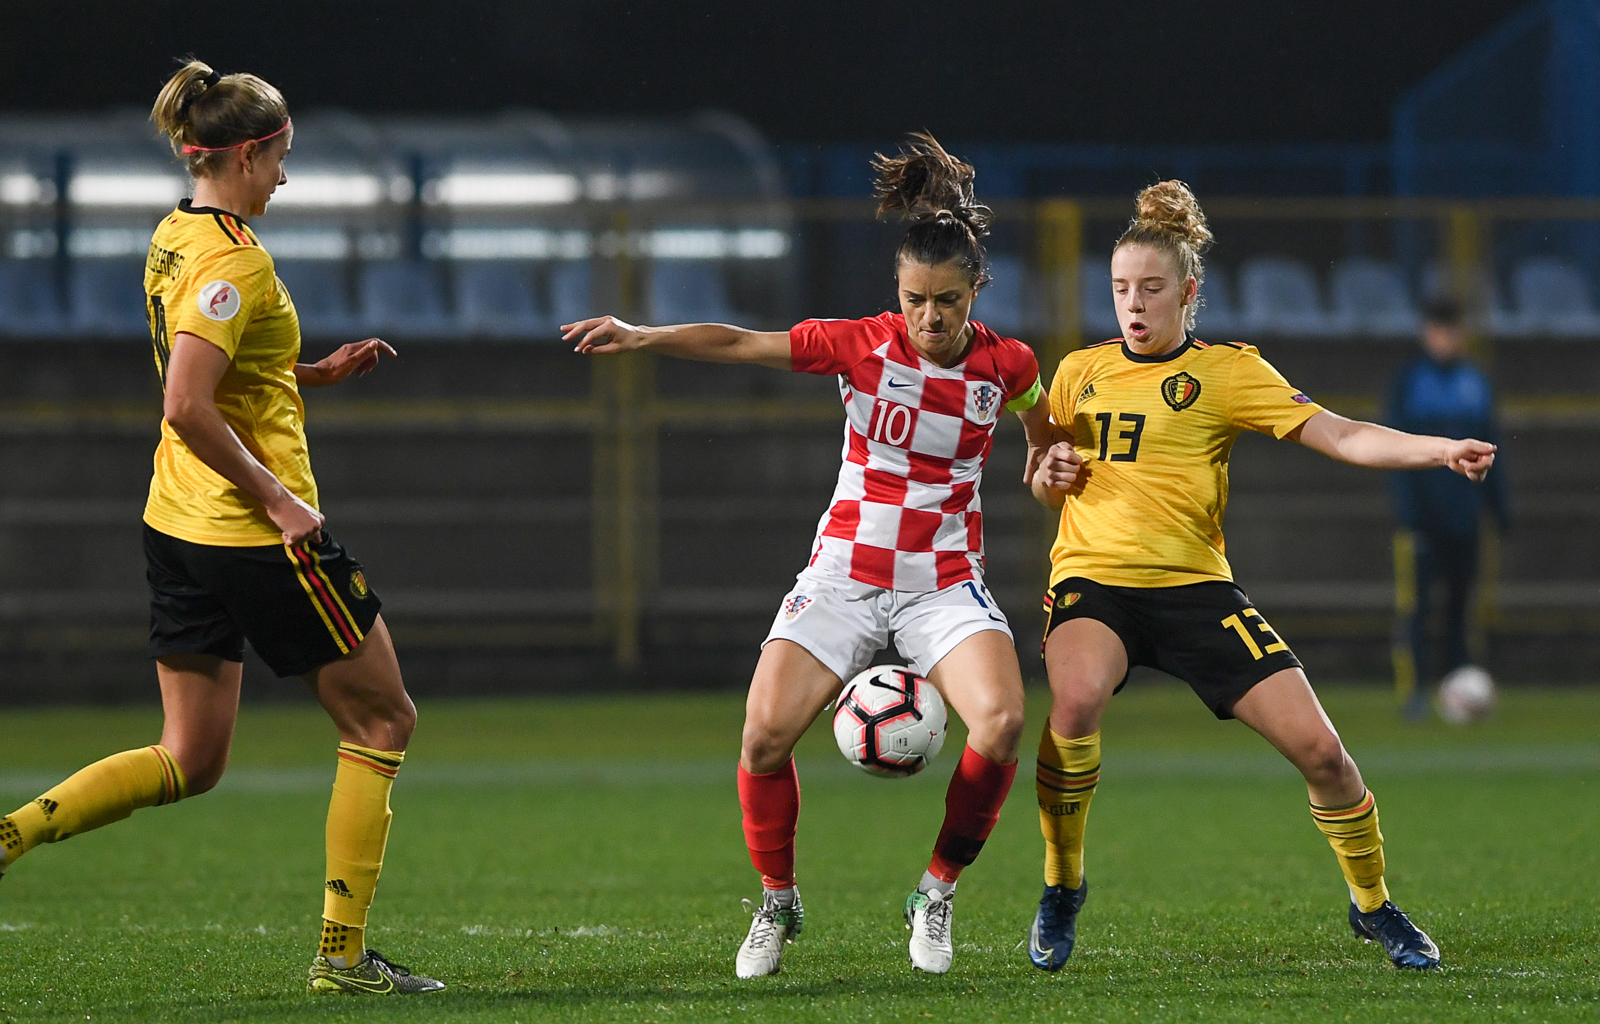 Belgium's Justine Vanhaevermaet, Croatia's Iva Landeka and Belgium's Elena Dhont pictured in action during a soccer game between Croatia and Belgium's Red Flames, Friday 08 November 2019 in Zapresic, Croatia, the third out of 8 qualification games for the women's Euro 2021 European Championships.